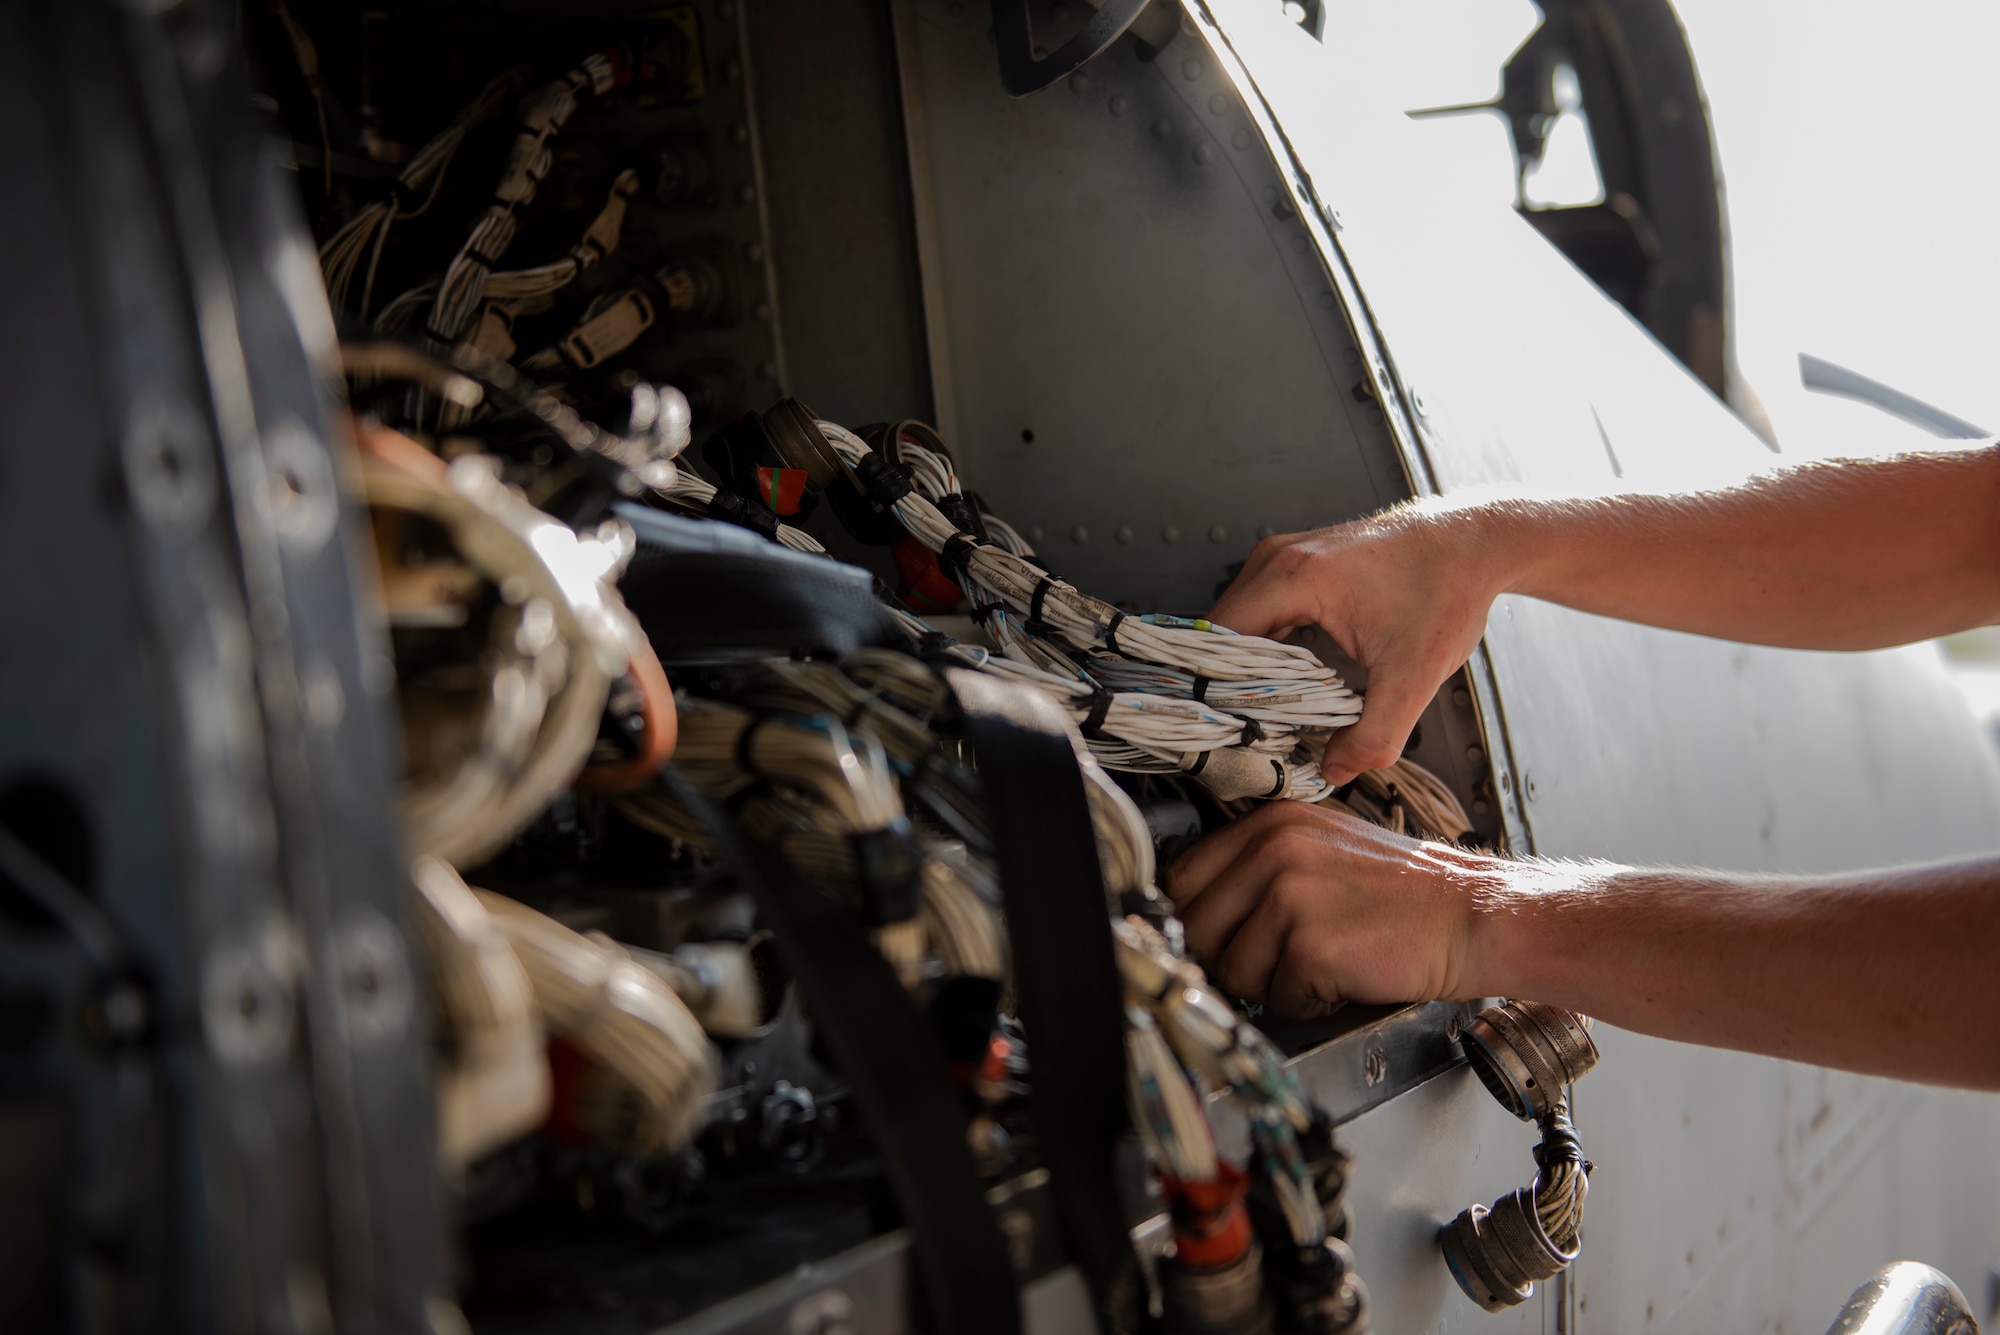 Airman 1st Class Tanner Giroux, 75th Aircraft Maintenance Unit (AMU) avionics technician, works on the wiring of an A-10C Thunderbolt II, Aug. 8, 2019, at Moody Air Force Base, Ga. The 75th AMU is responsible for the upkeep and maintenance of the Air Force’s largest operational A-10C Thunderbolt II fighter group. (U.S.  Air Force photo by 2nd Lt. Kaylin P. Hankerson)